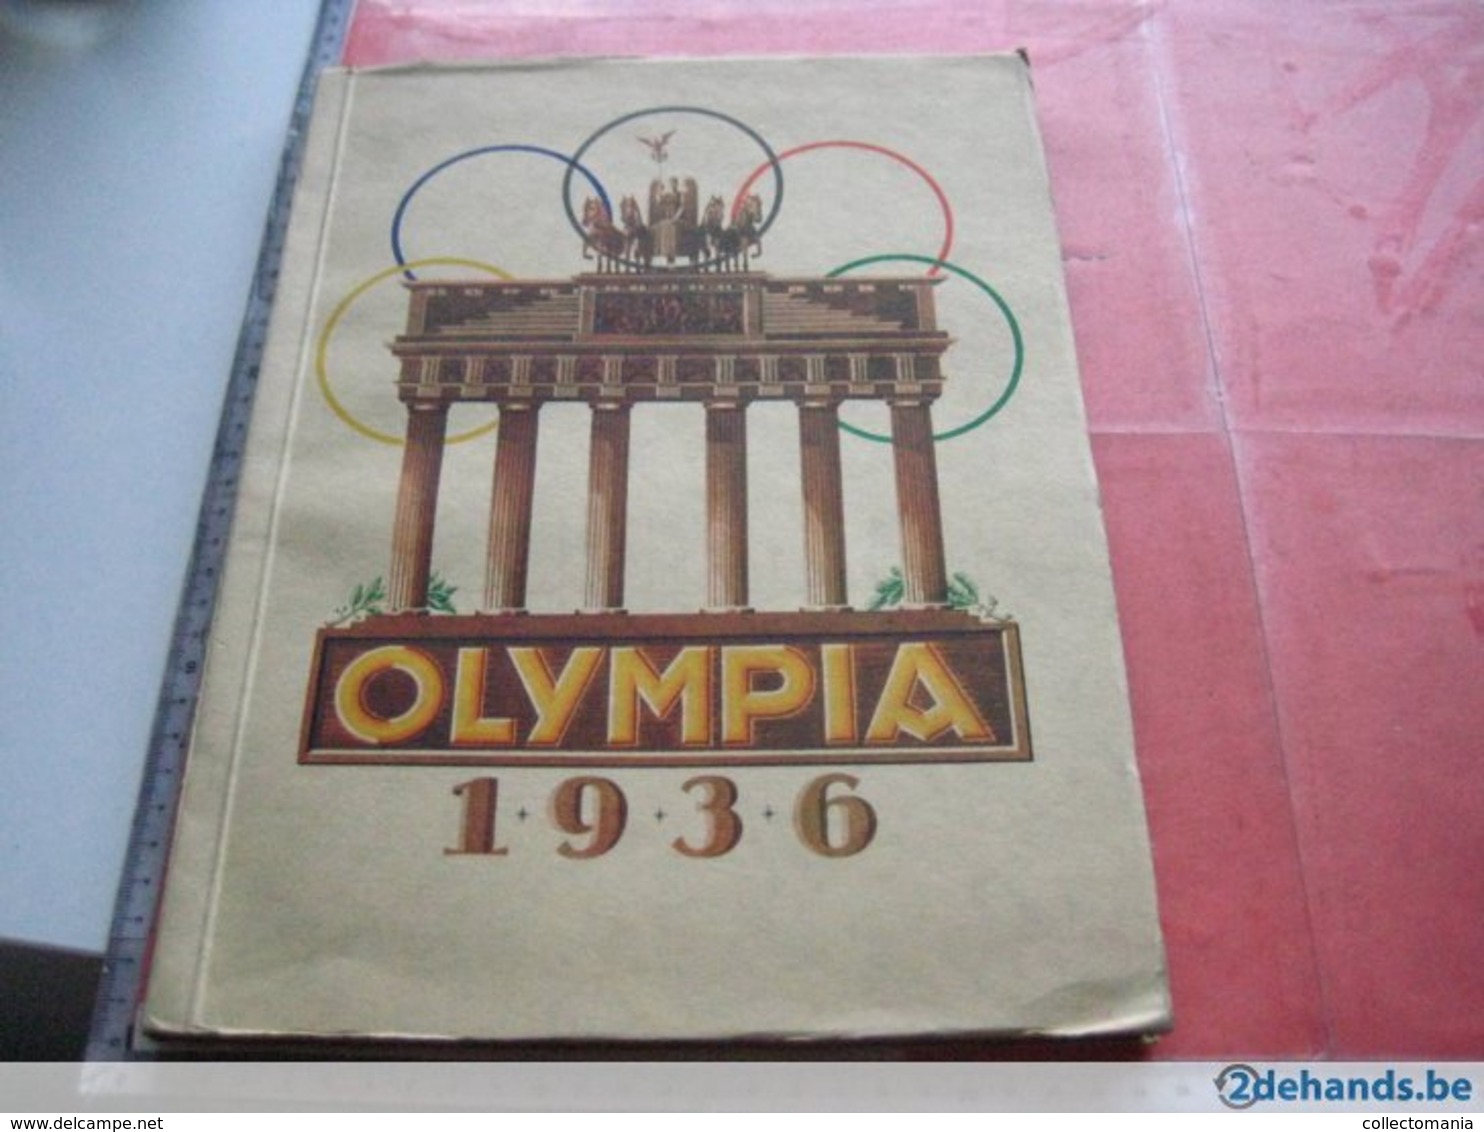 9 complete , chromo albums,  very good condition, from the fifties and thirtoes  : Congo, disney, olympic games 1936